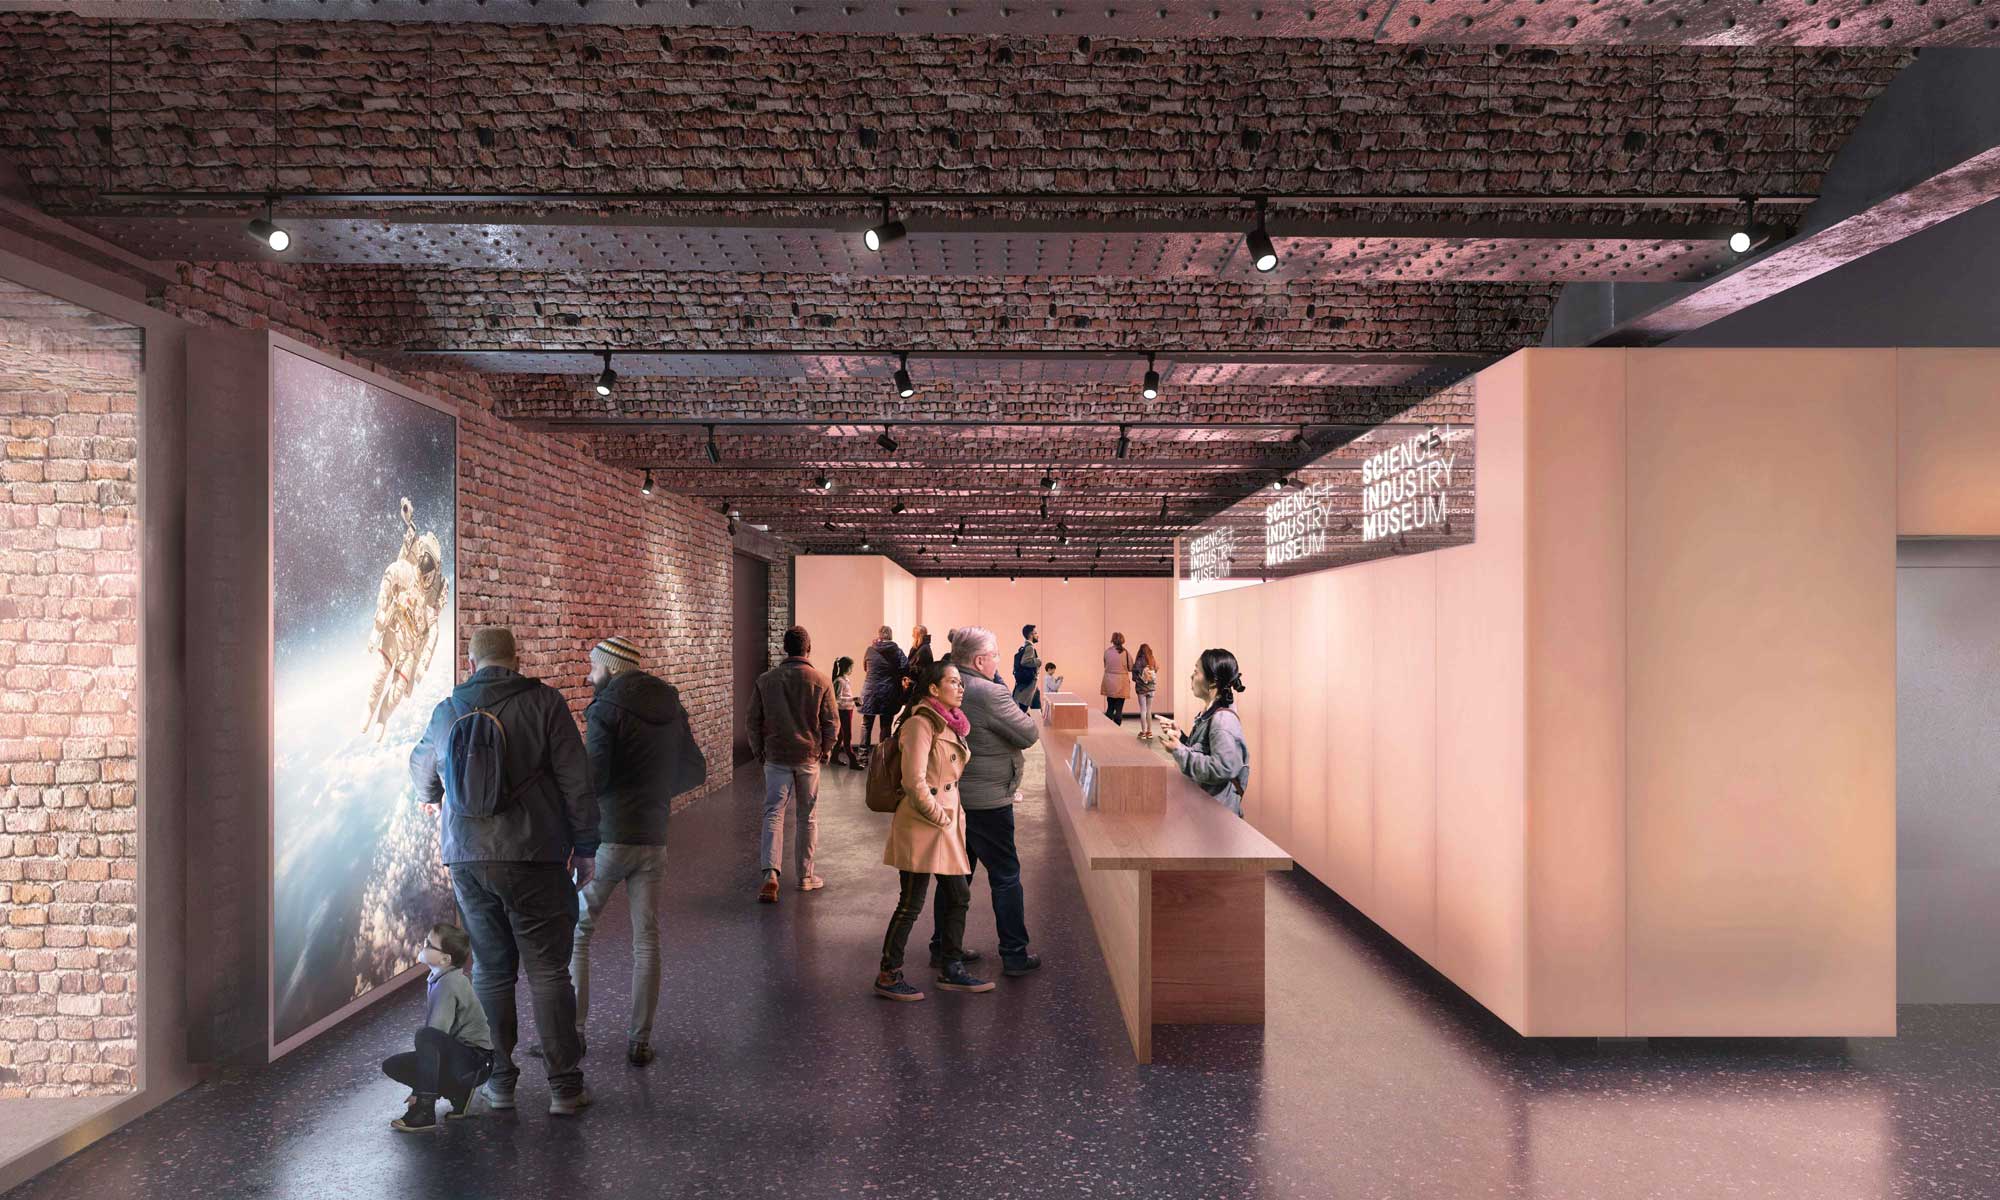 Artist impression of the interior of the new Special Exhibition Gallery